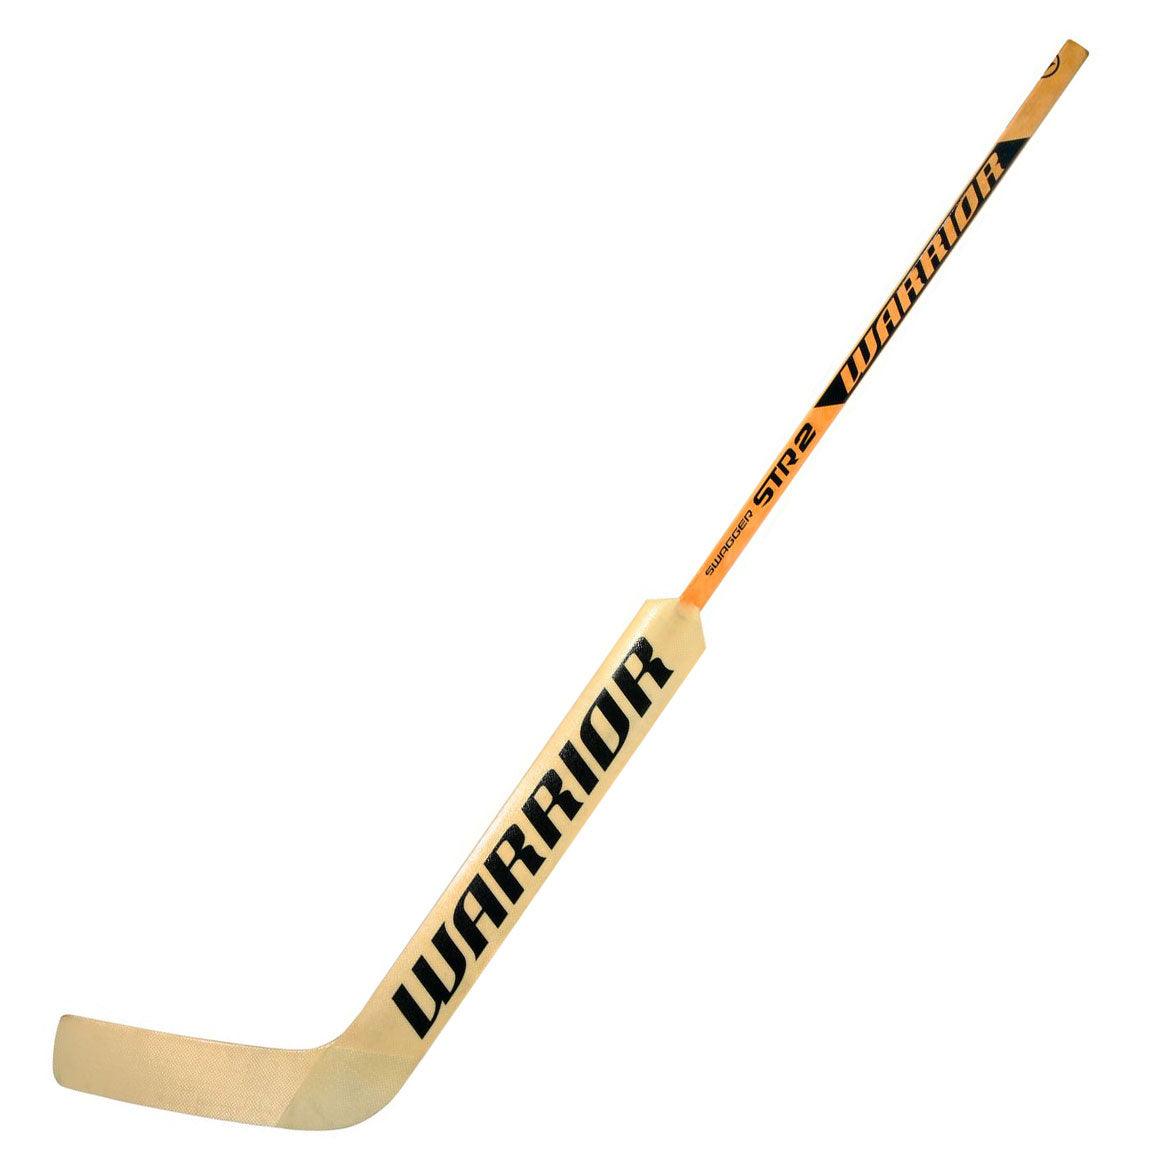 Swagger STR2 Goalie Stick - Intermediate - Sports Excellence